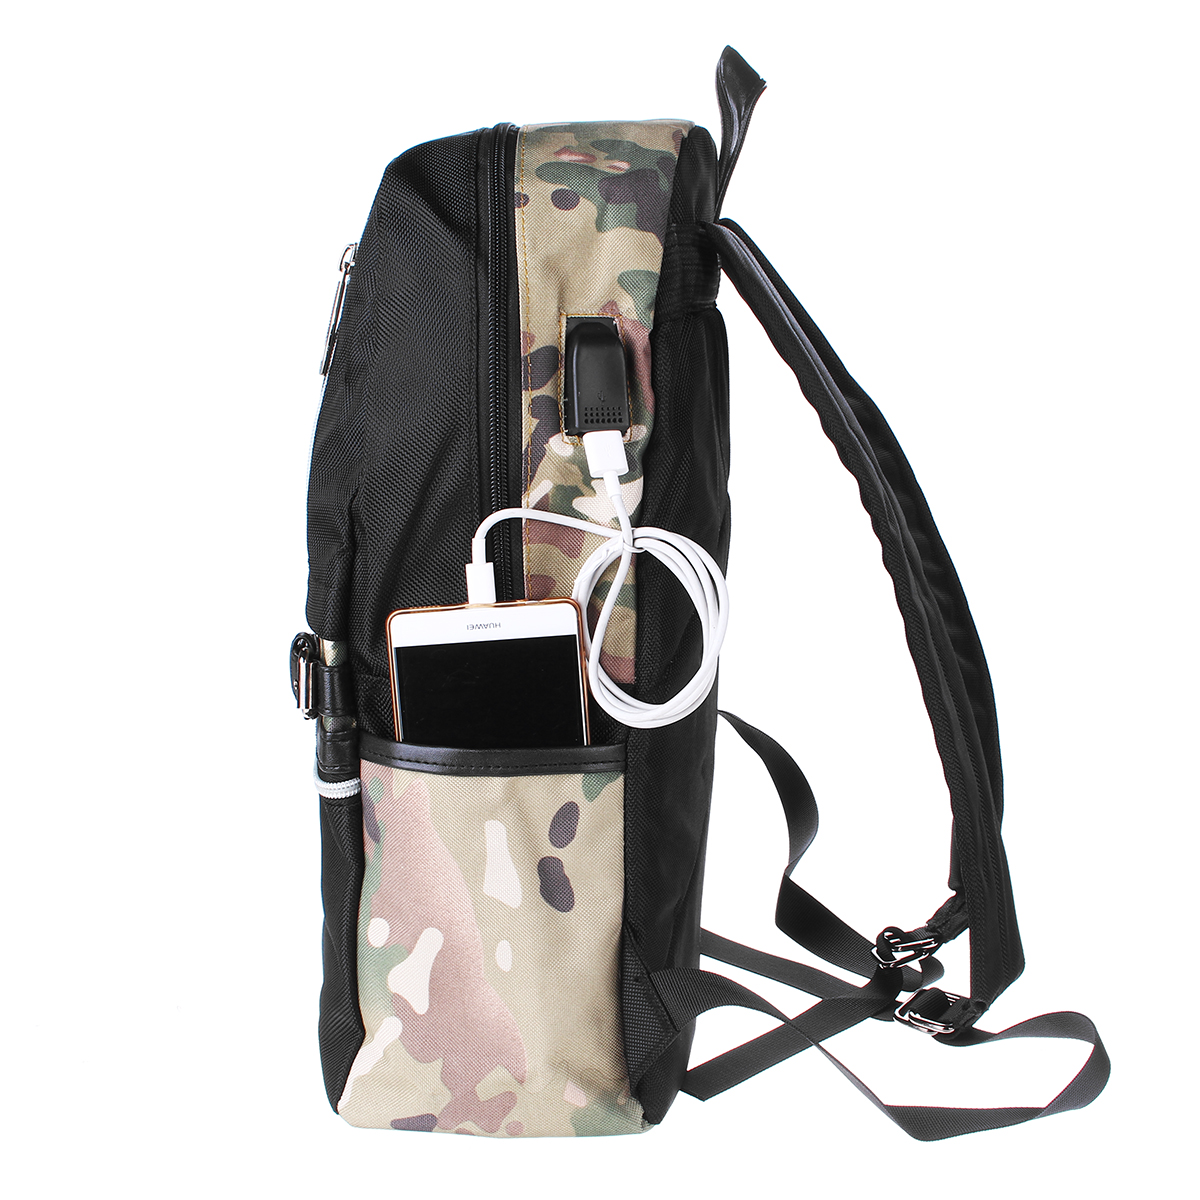 295x125x435cm-Anti-Theft-Waterproof-Backpack-With-USB-Charging-Port-Outdoor-Travel-Fishing-Bag-1287206-4